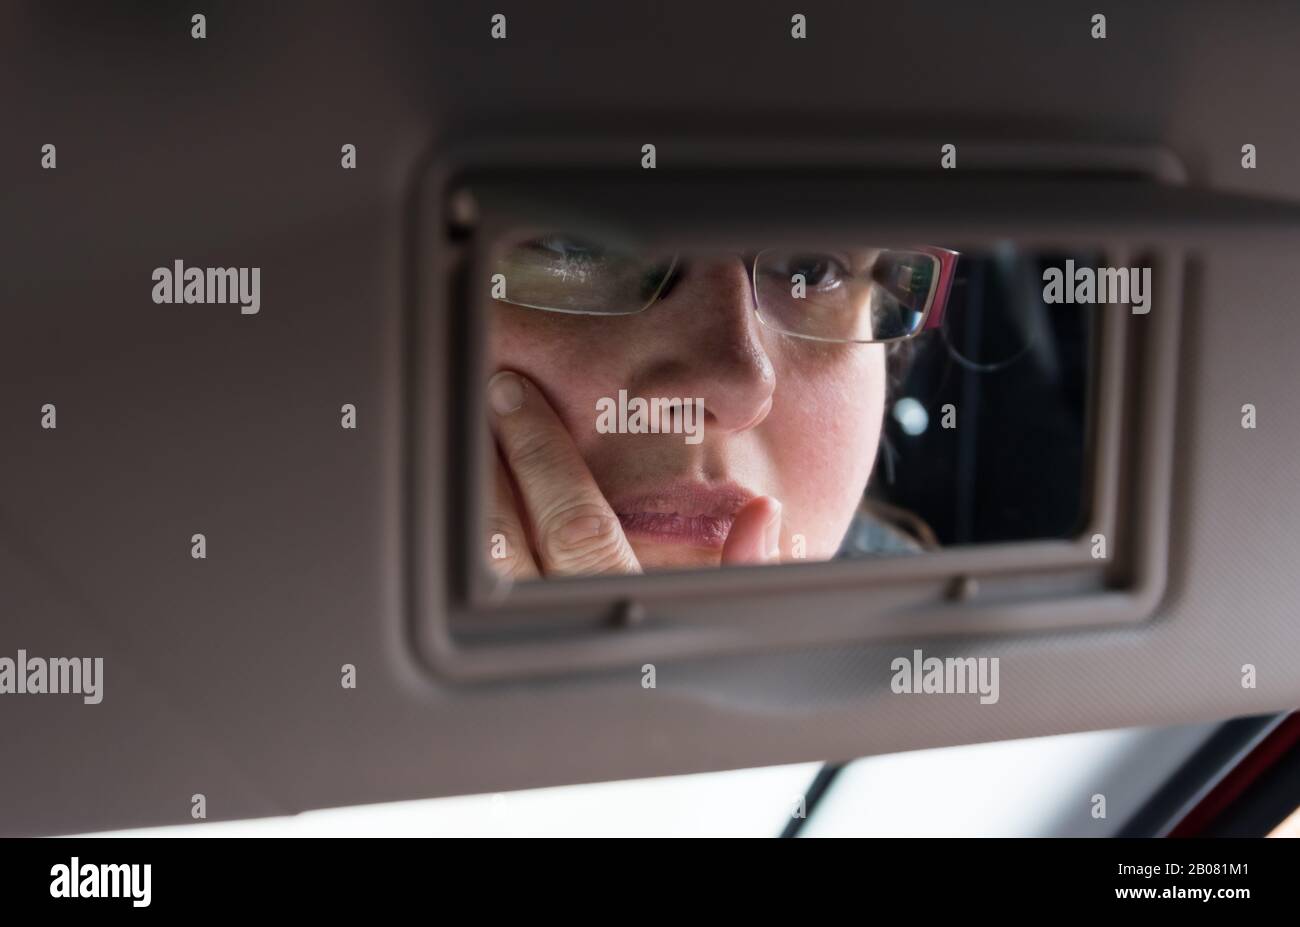 Self reflect concept. Woman looking and thinking to herself in a mirror in the sun visor of a car. Thinking time concept. Self reflection concept. Stock Photo